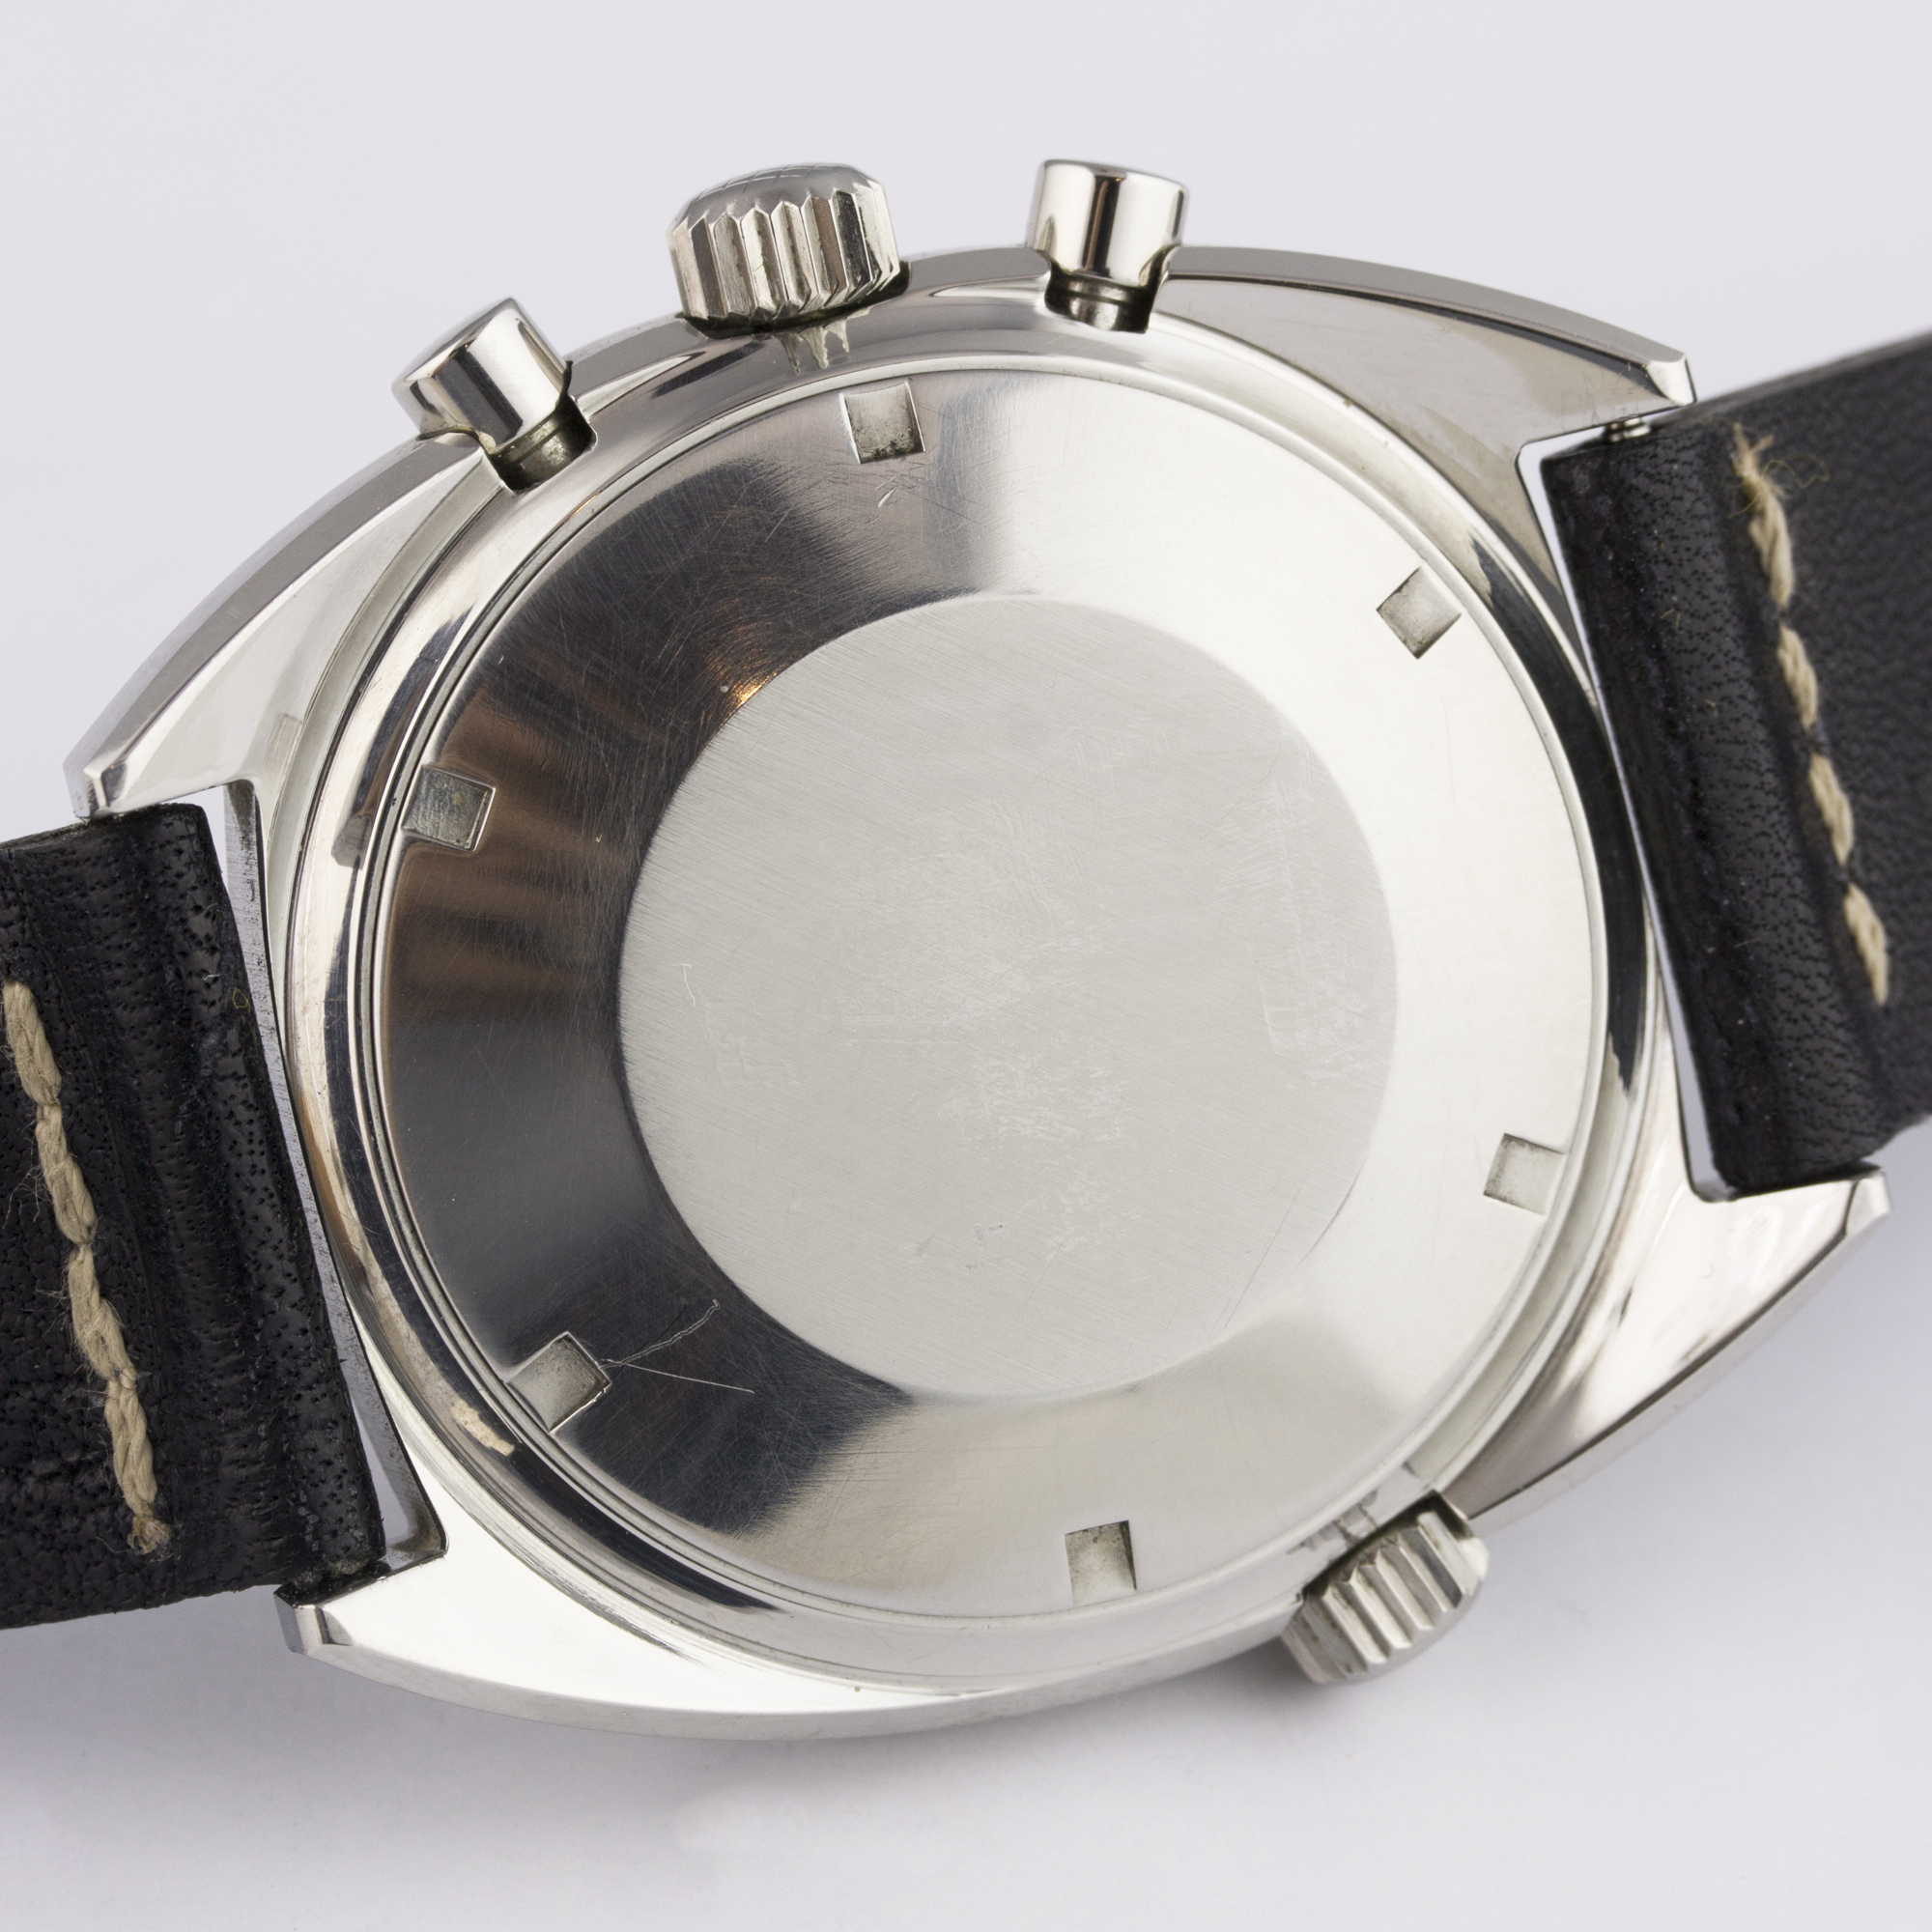 A RARE GENTLEMAN'S STAINLESS STEEL LEMANIA DIVERS CHRONOGRAPH WRIST WATCH CIRCA 1970s, REF. 9658 - Image 7 of 9